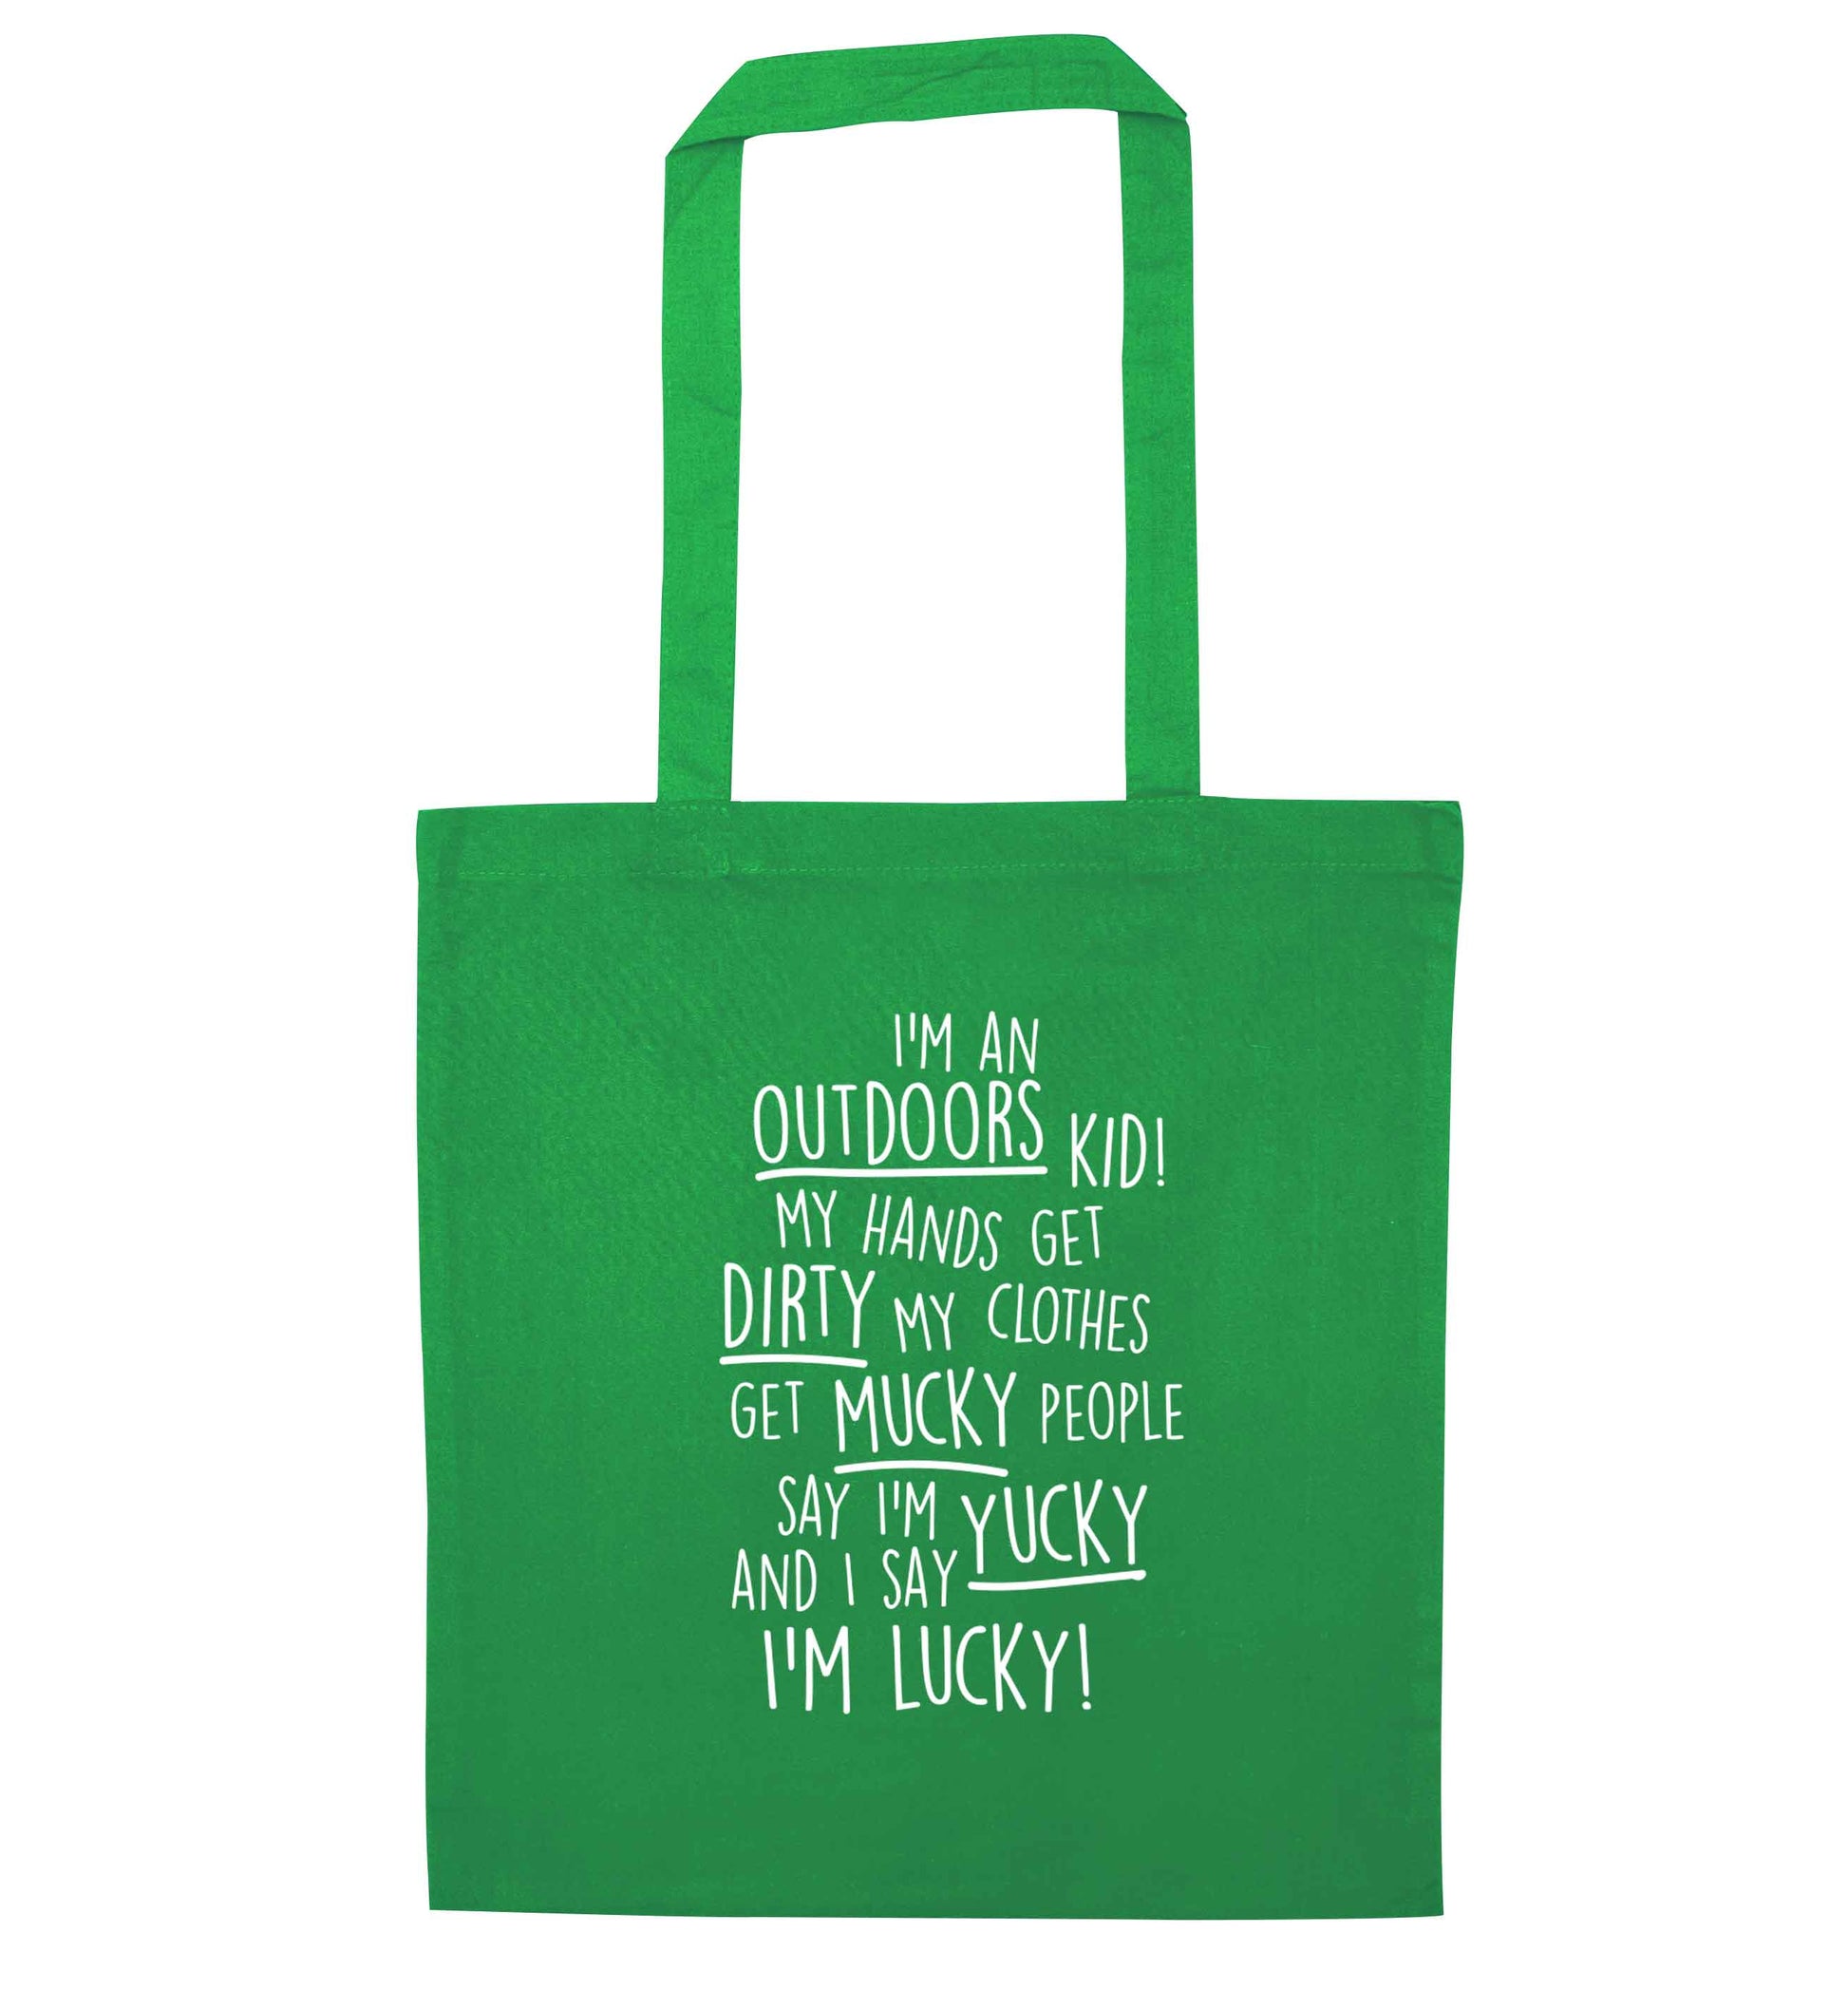 I'm an outdoors kid poem green tote bag